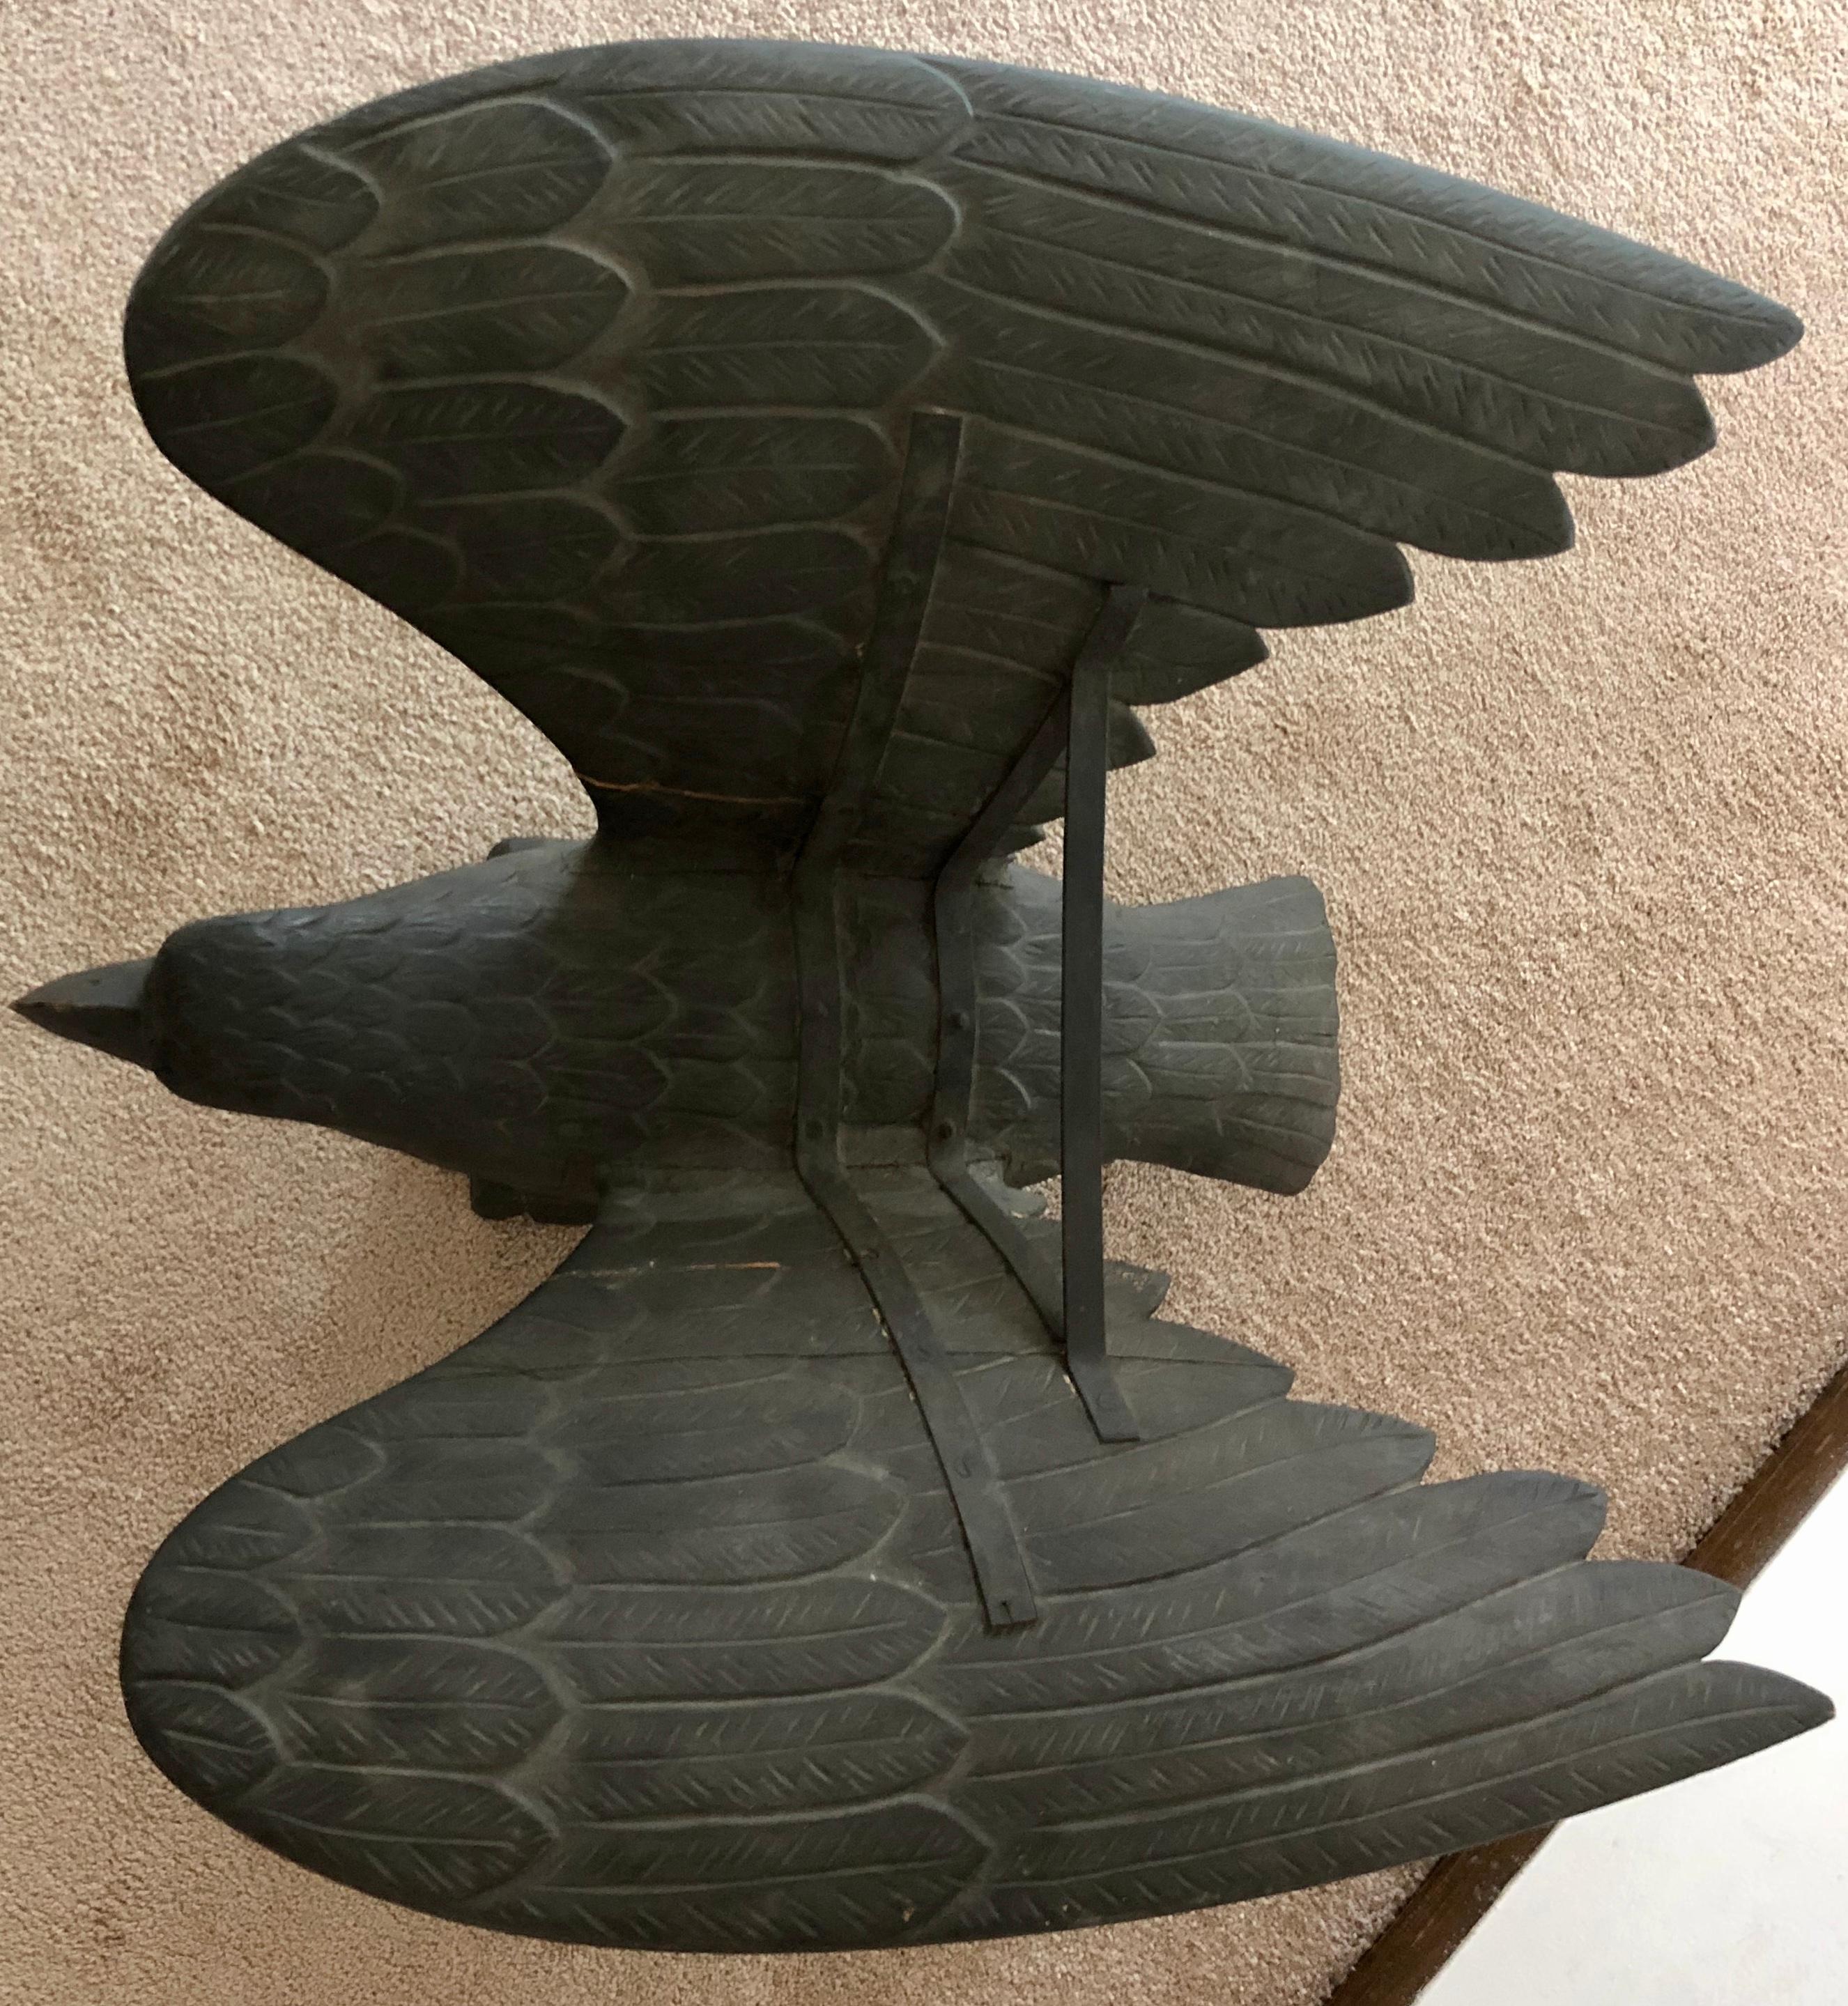 Impressive carved pilot house eagle with old greenish gray overpaint. In excellent condition for its age. These eagles were placed on the top of the pilot house in the mid to late 19th century in New England. A great piece of Americana.